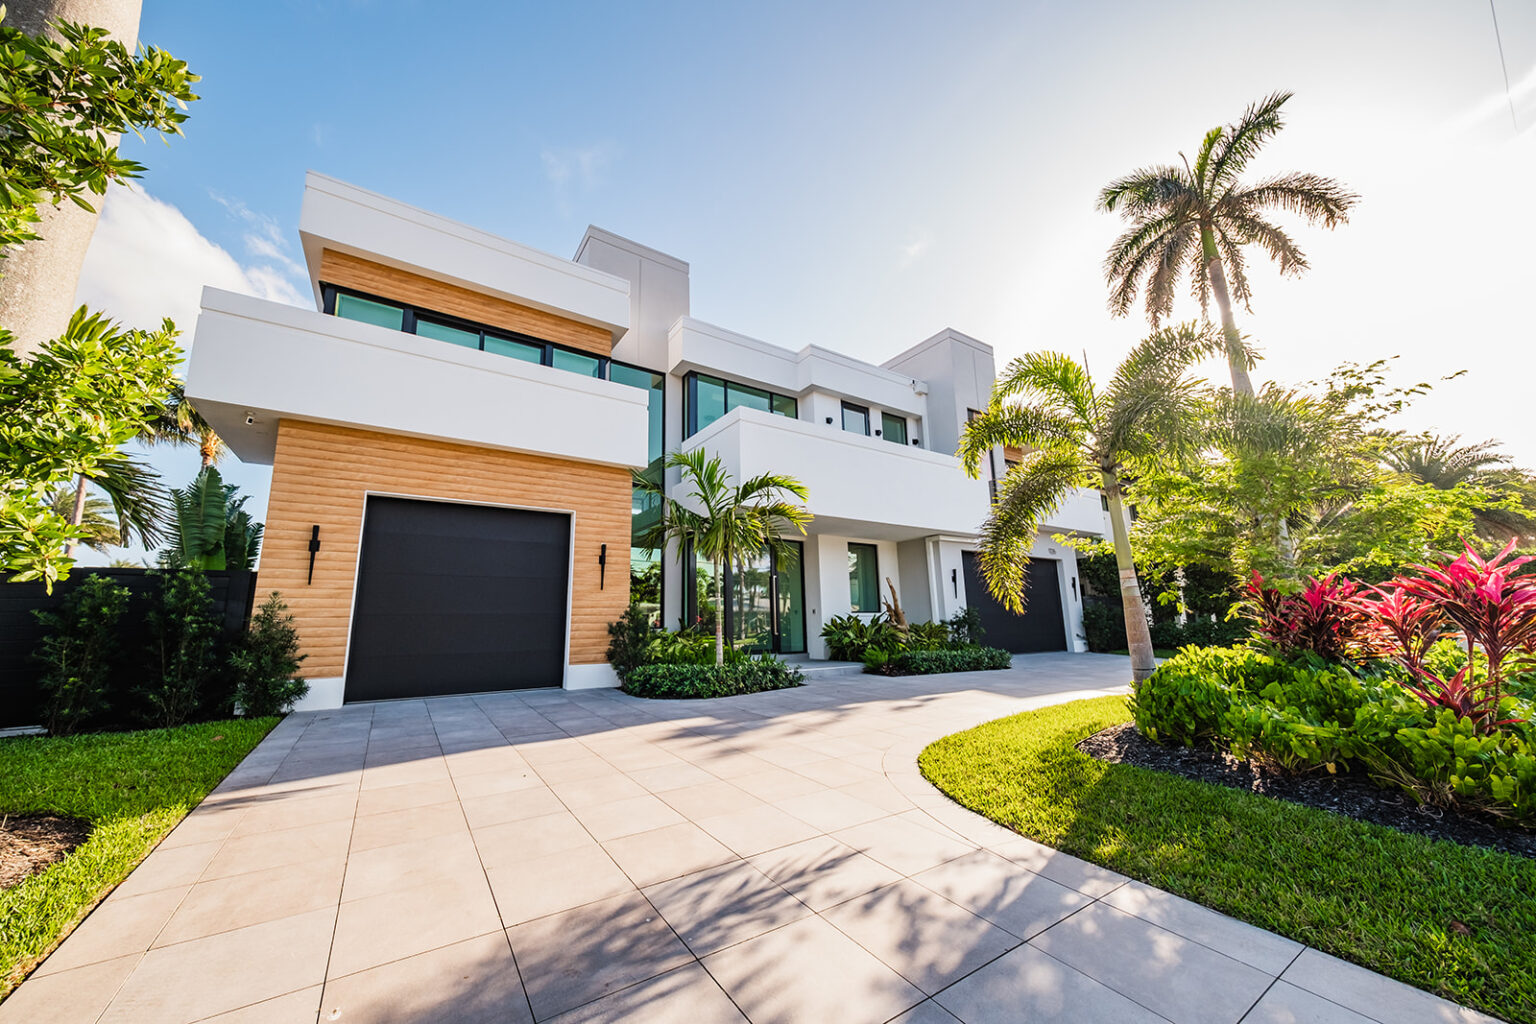 Custom waterfront home in Delray Beach, FL built by Snellman Construction